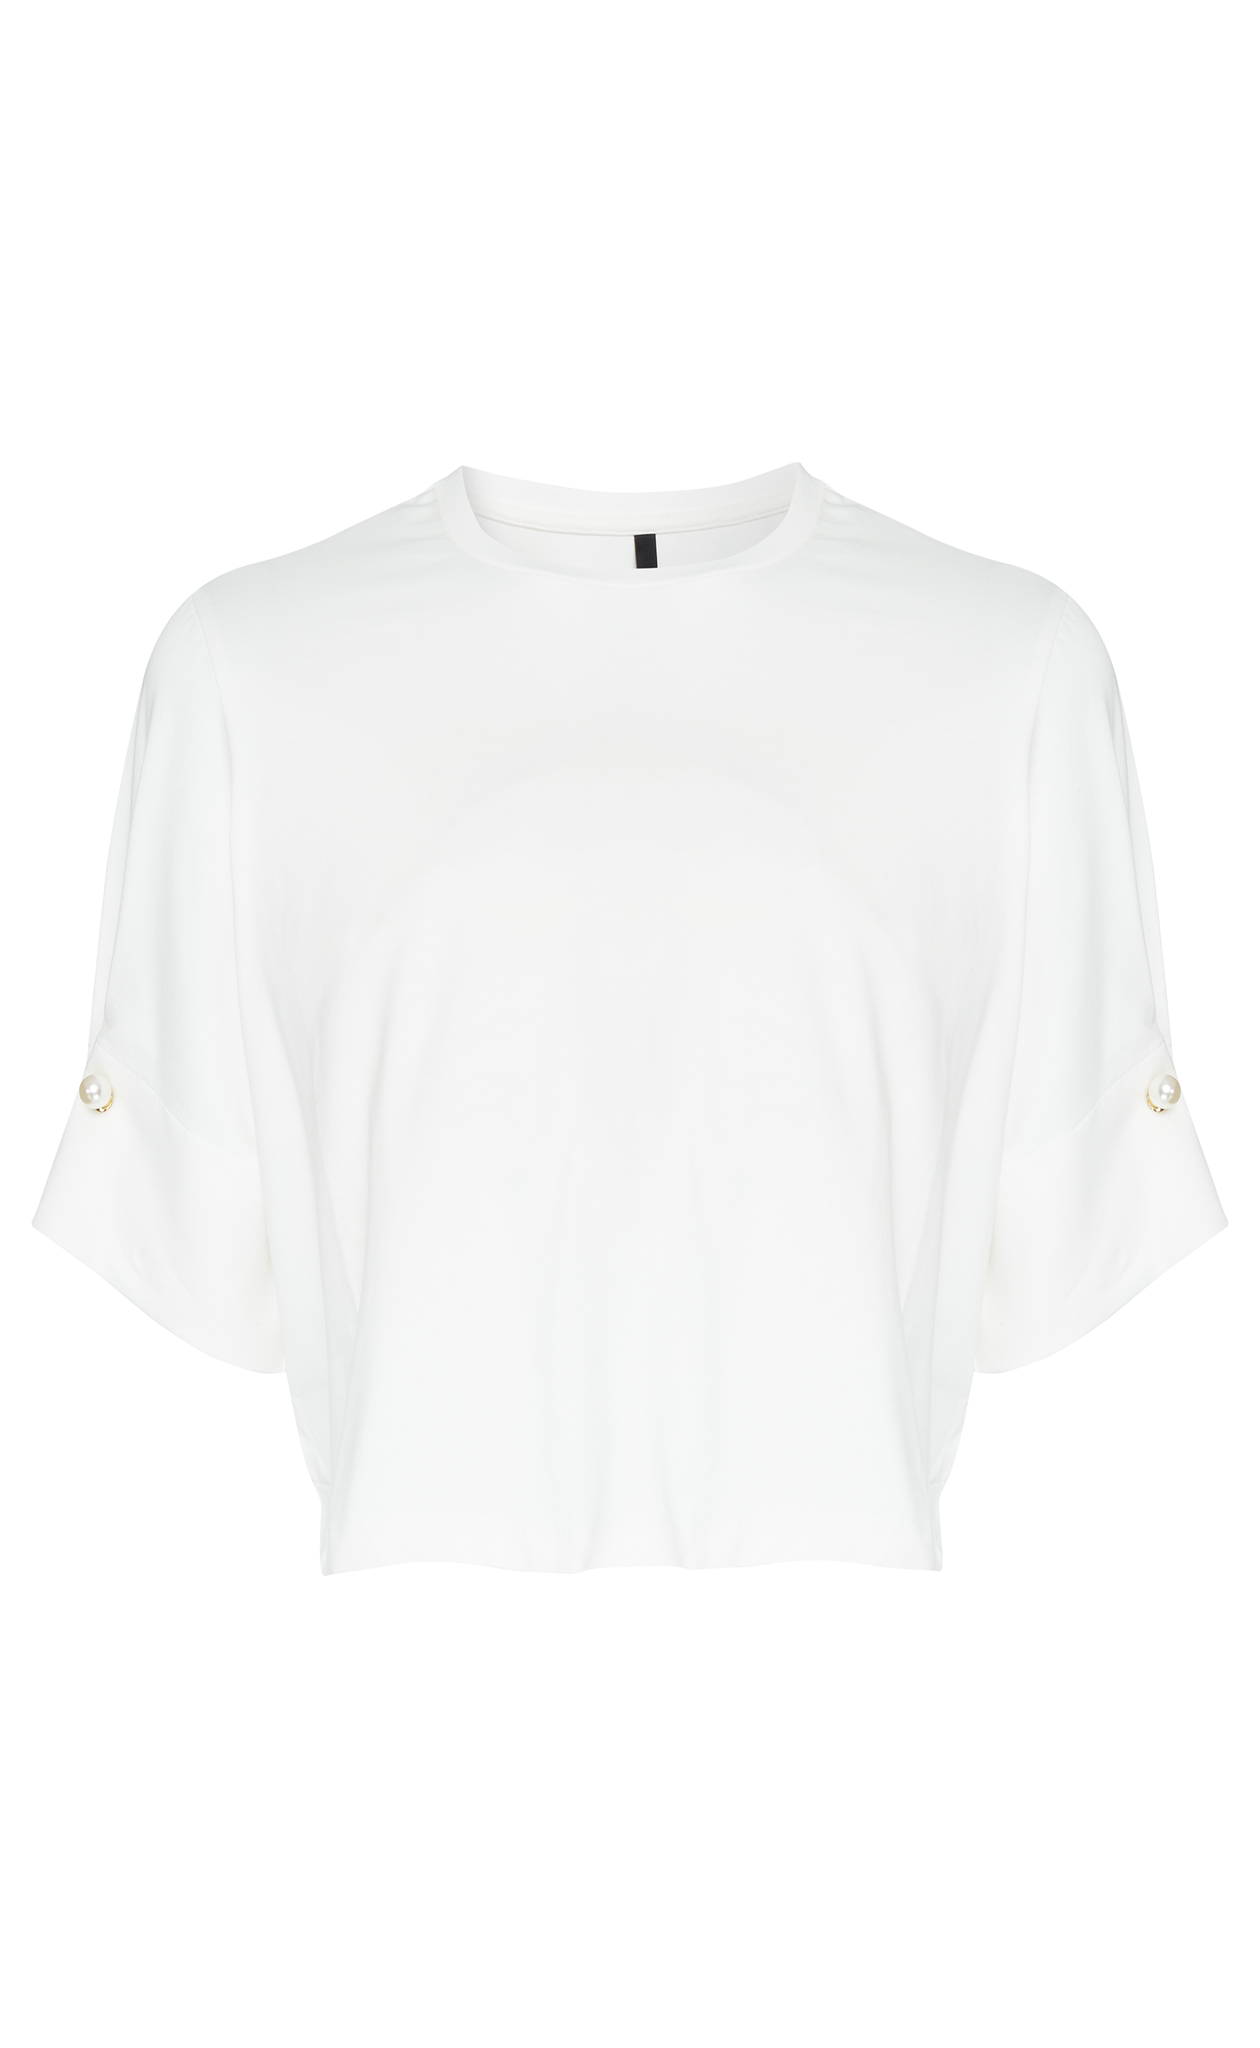 MONICA WHITE T-SHIRT – Mother of Pearl